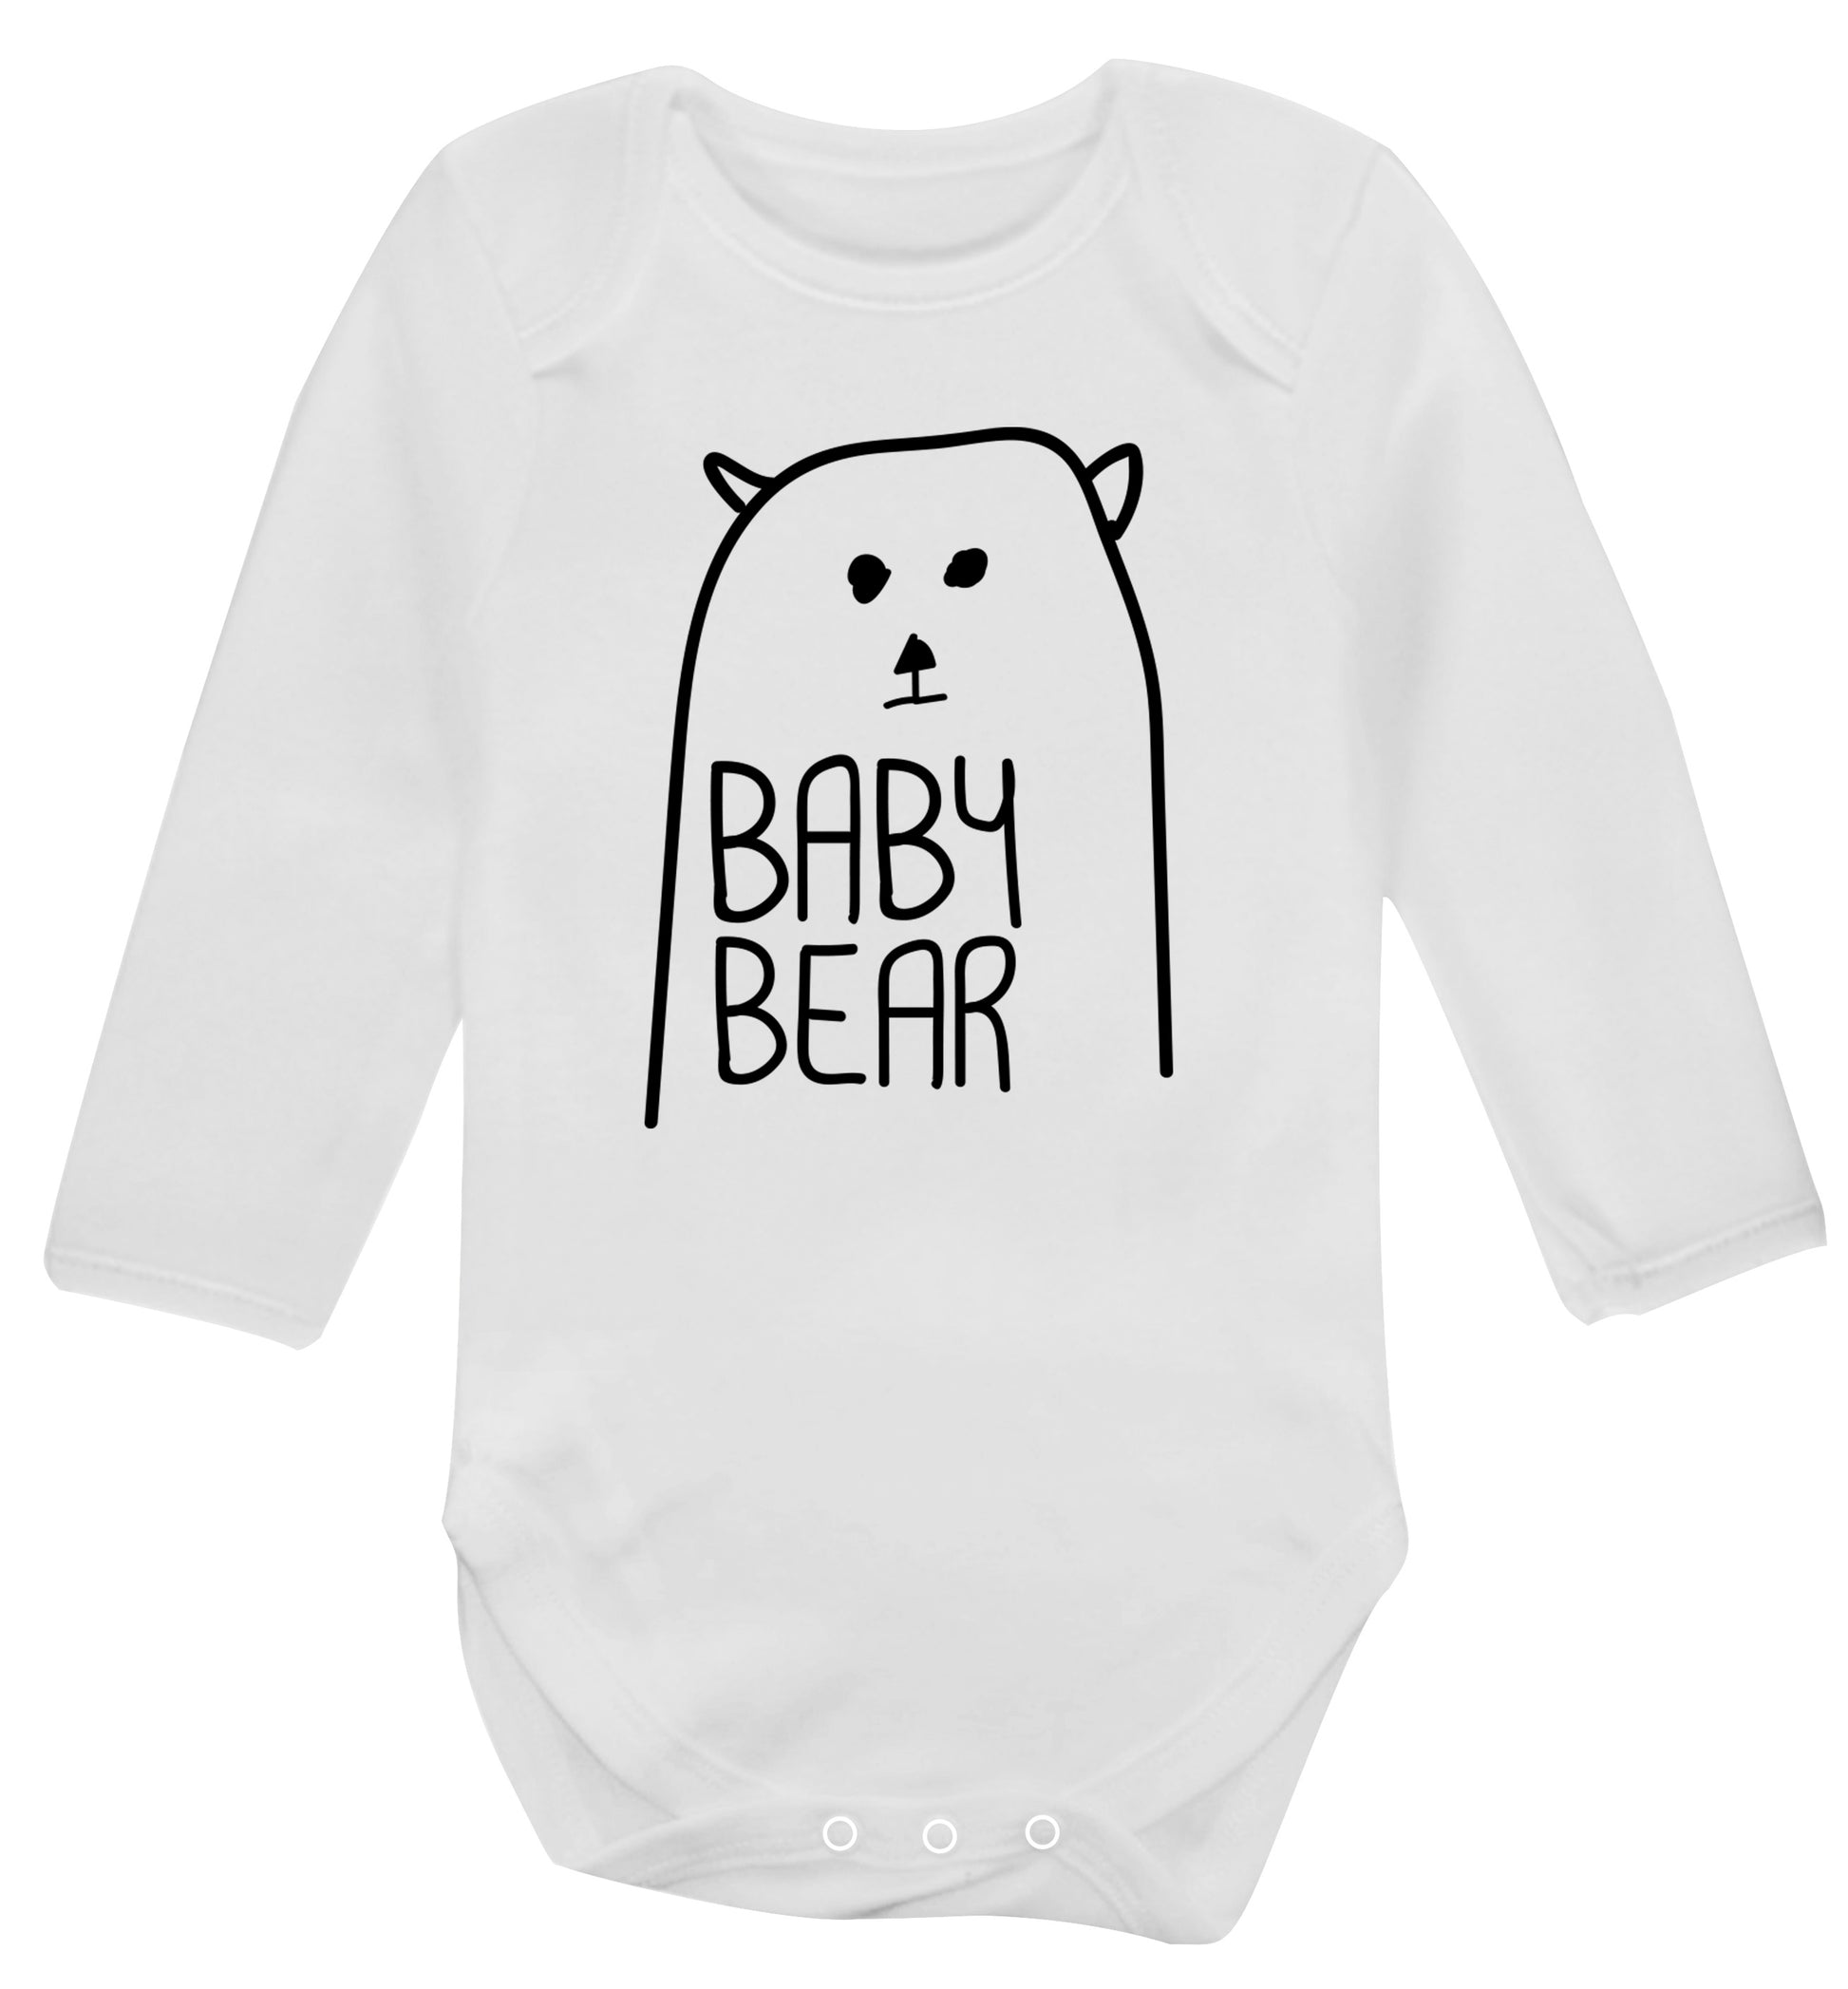 Baby bear Baby Vest long sleeved white 6-12 months